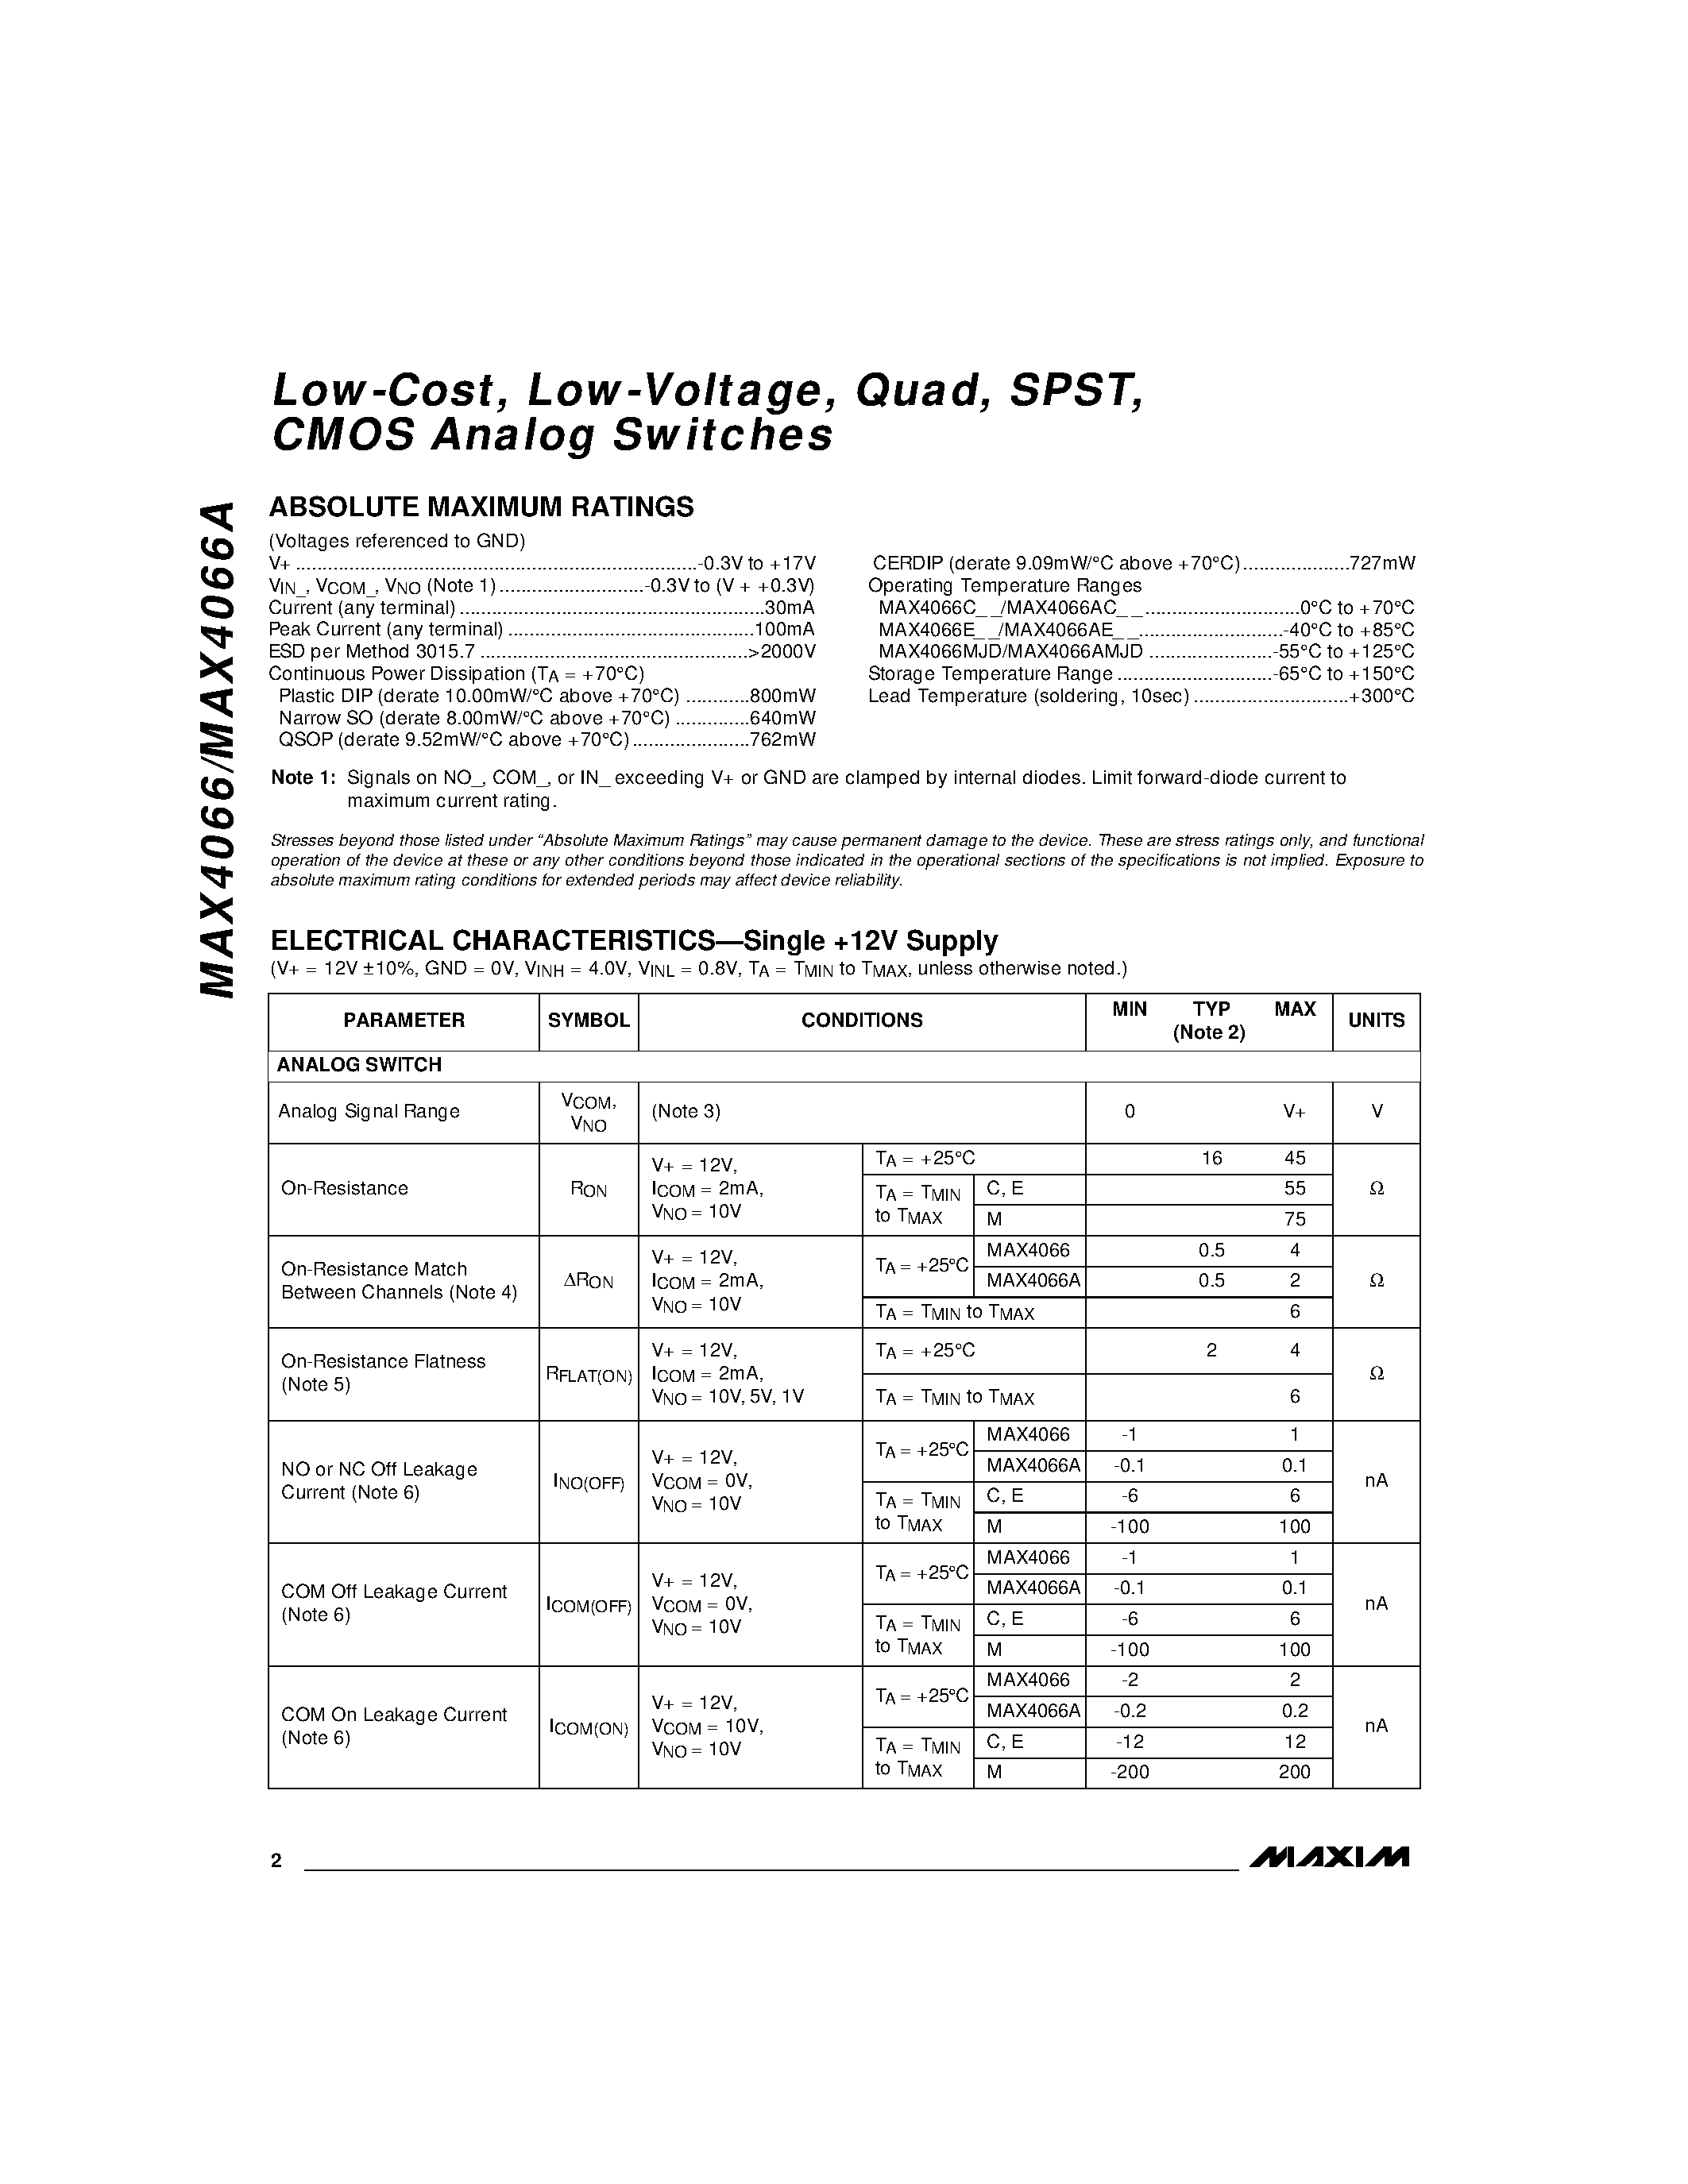 Datasheet 4066 - Low-Cost/ Low-Voltage/ Quad/ SPST/ CMOS Analog Switches page 2